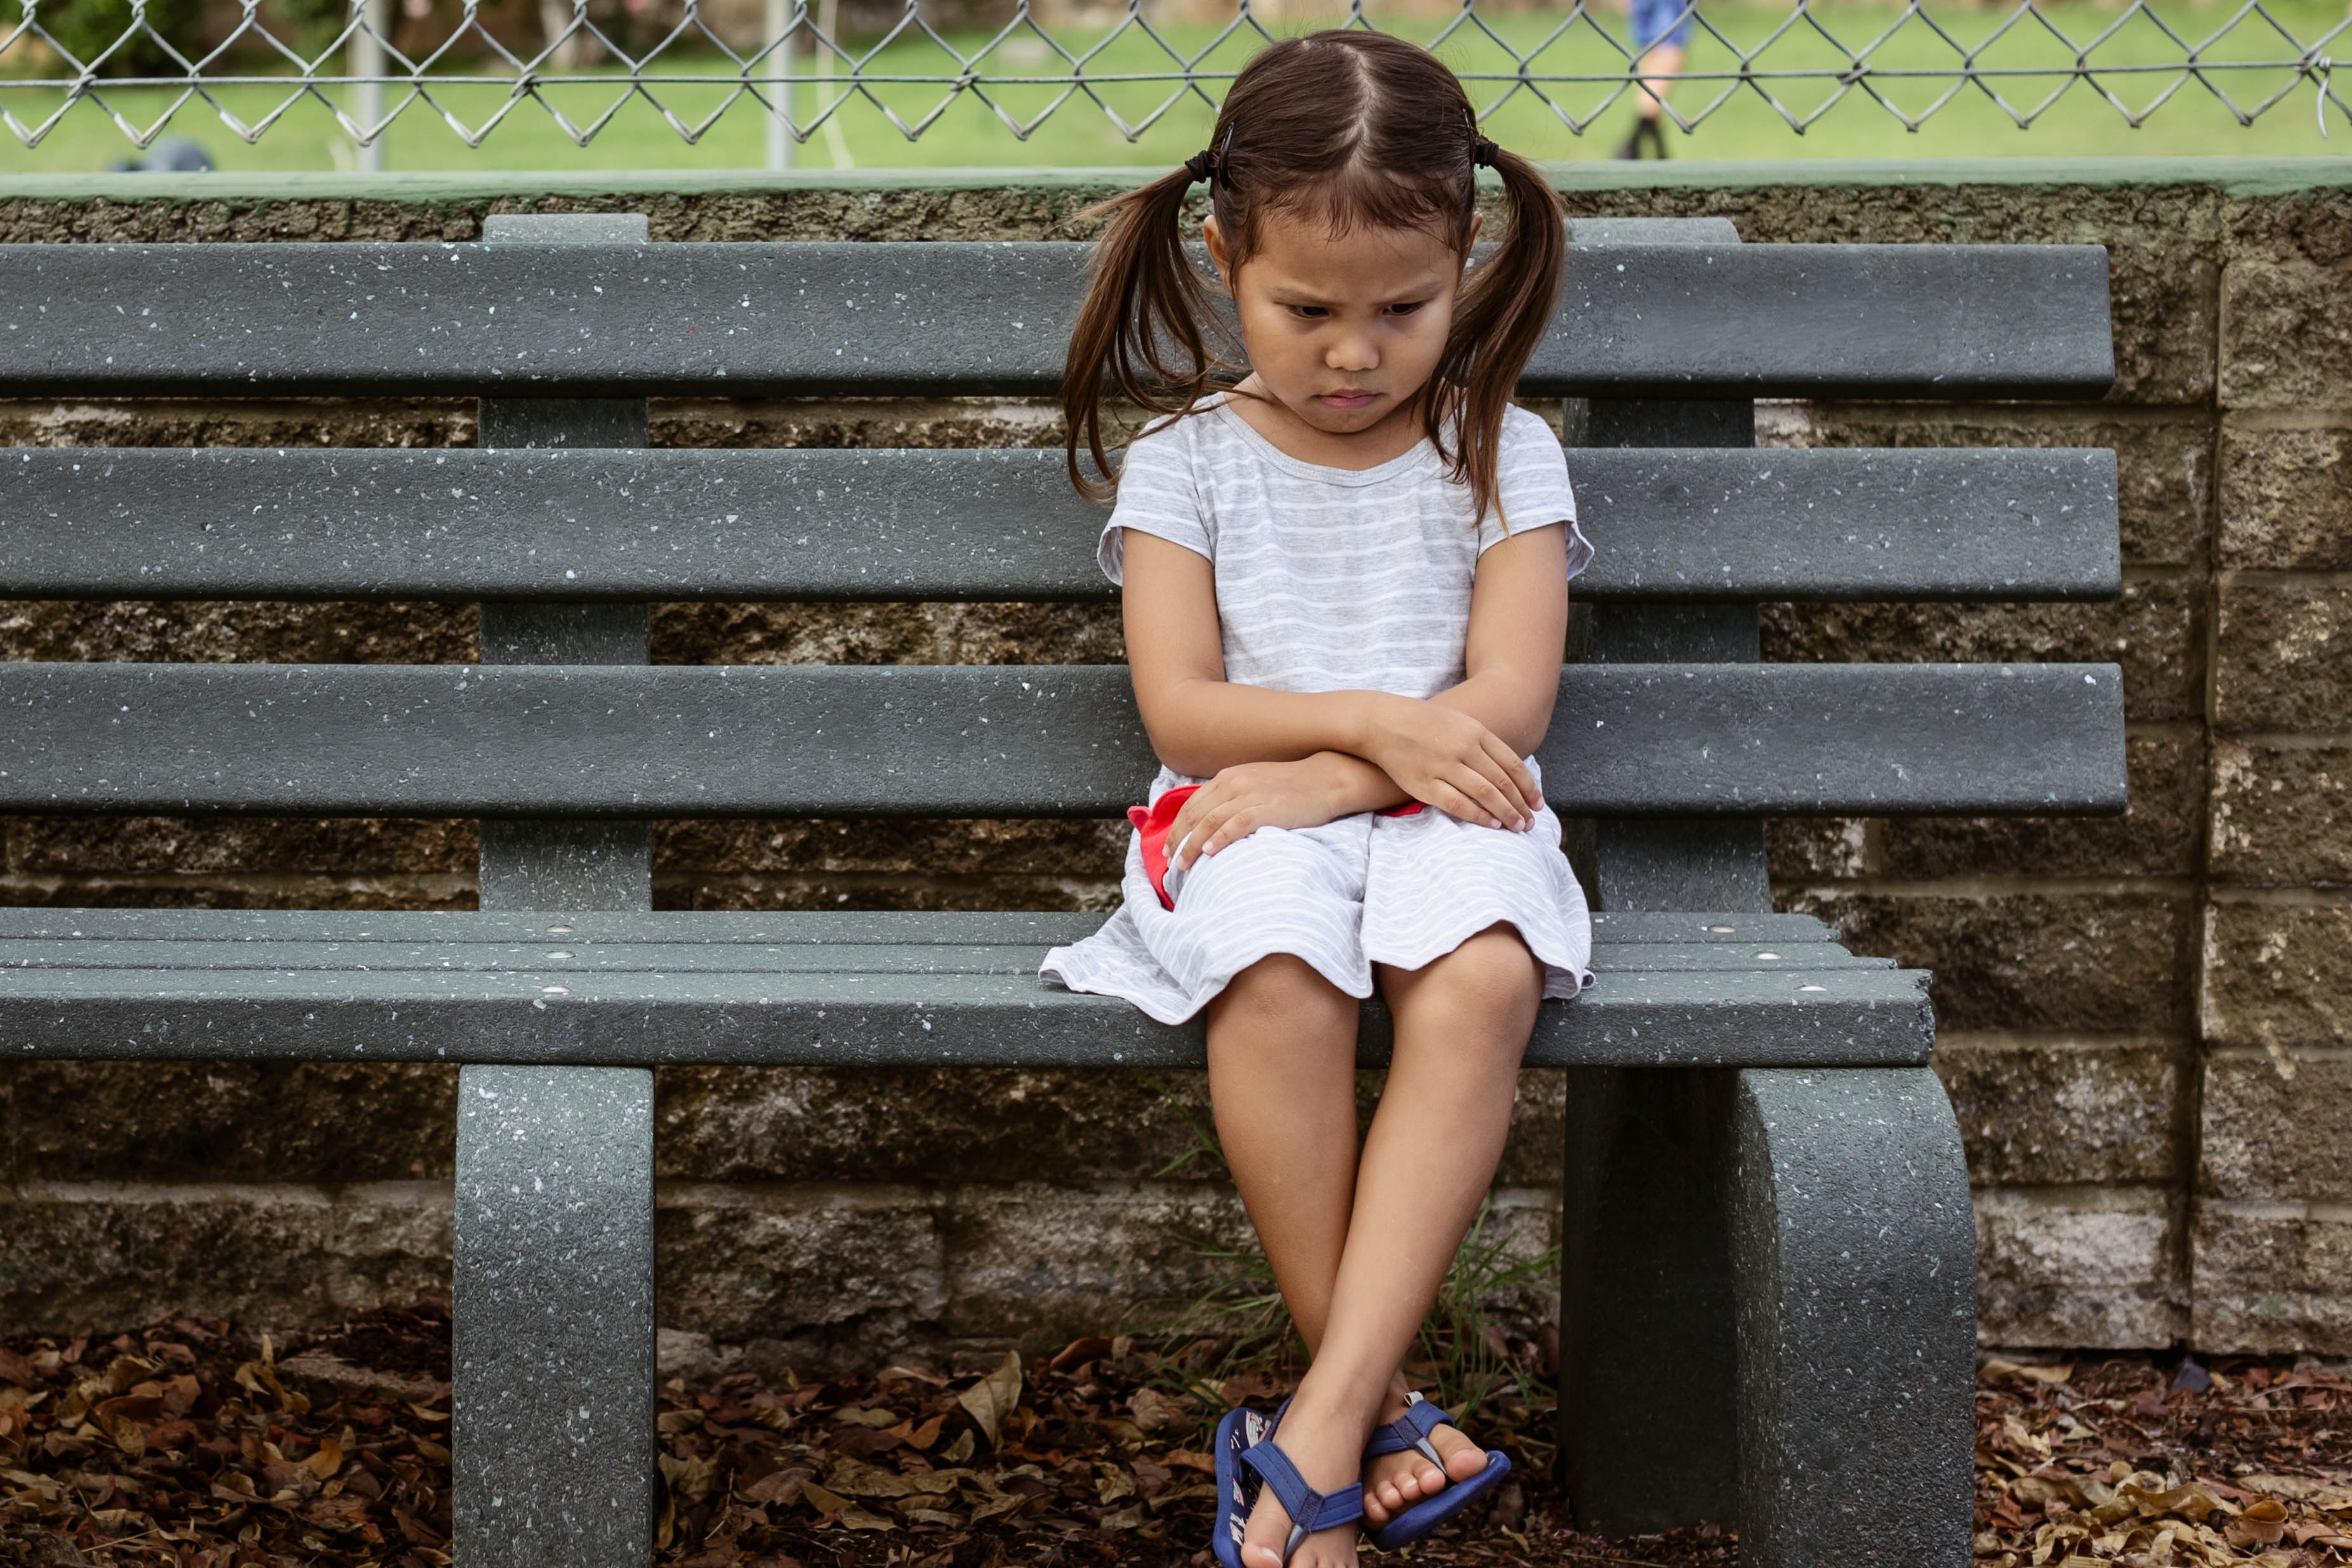 An upset little girl sitting alone on the bench | Source: Shutterstock